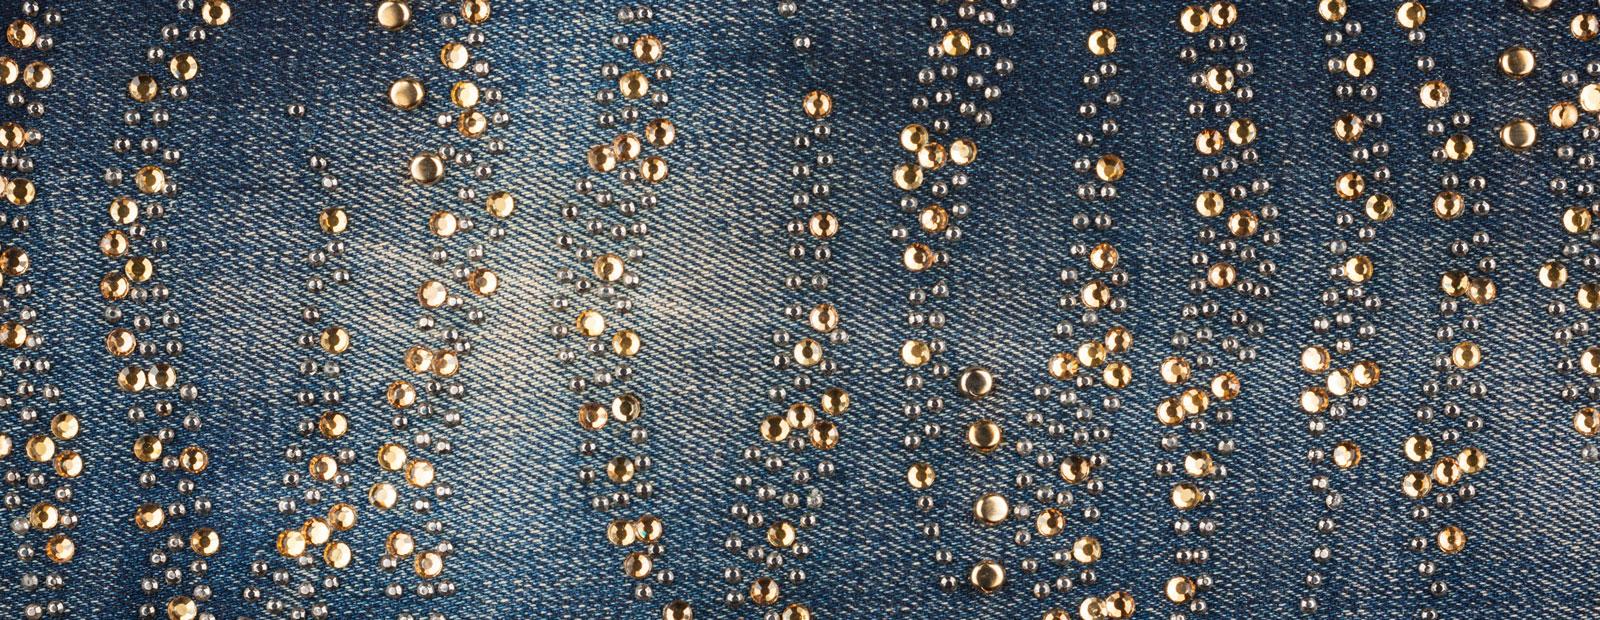 A bedazzled pair of bejewelled denim jeans.